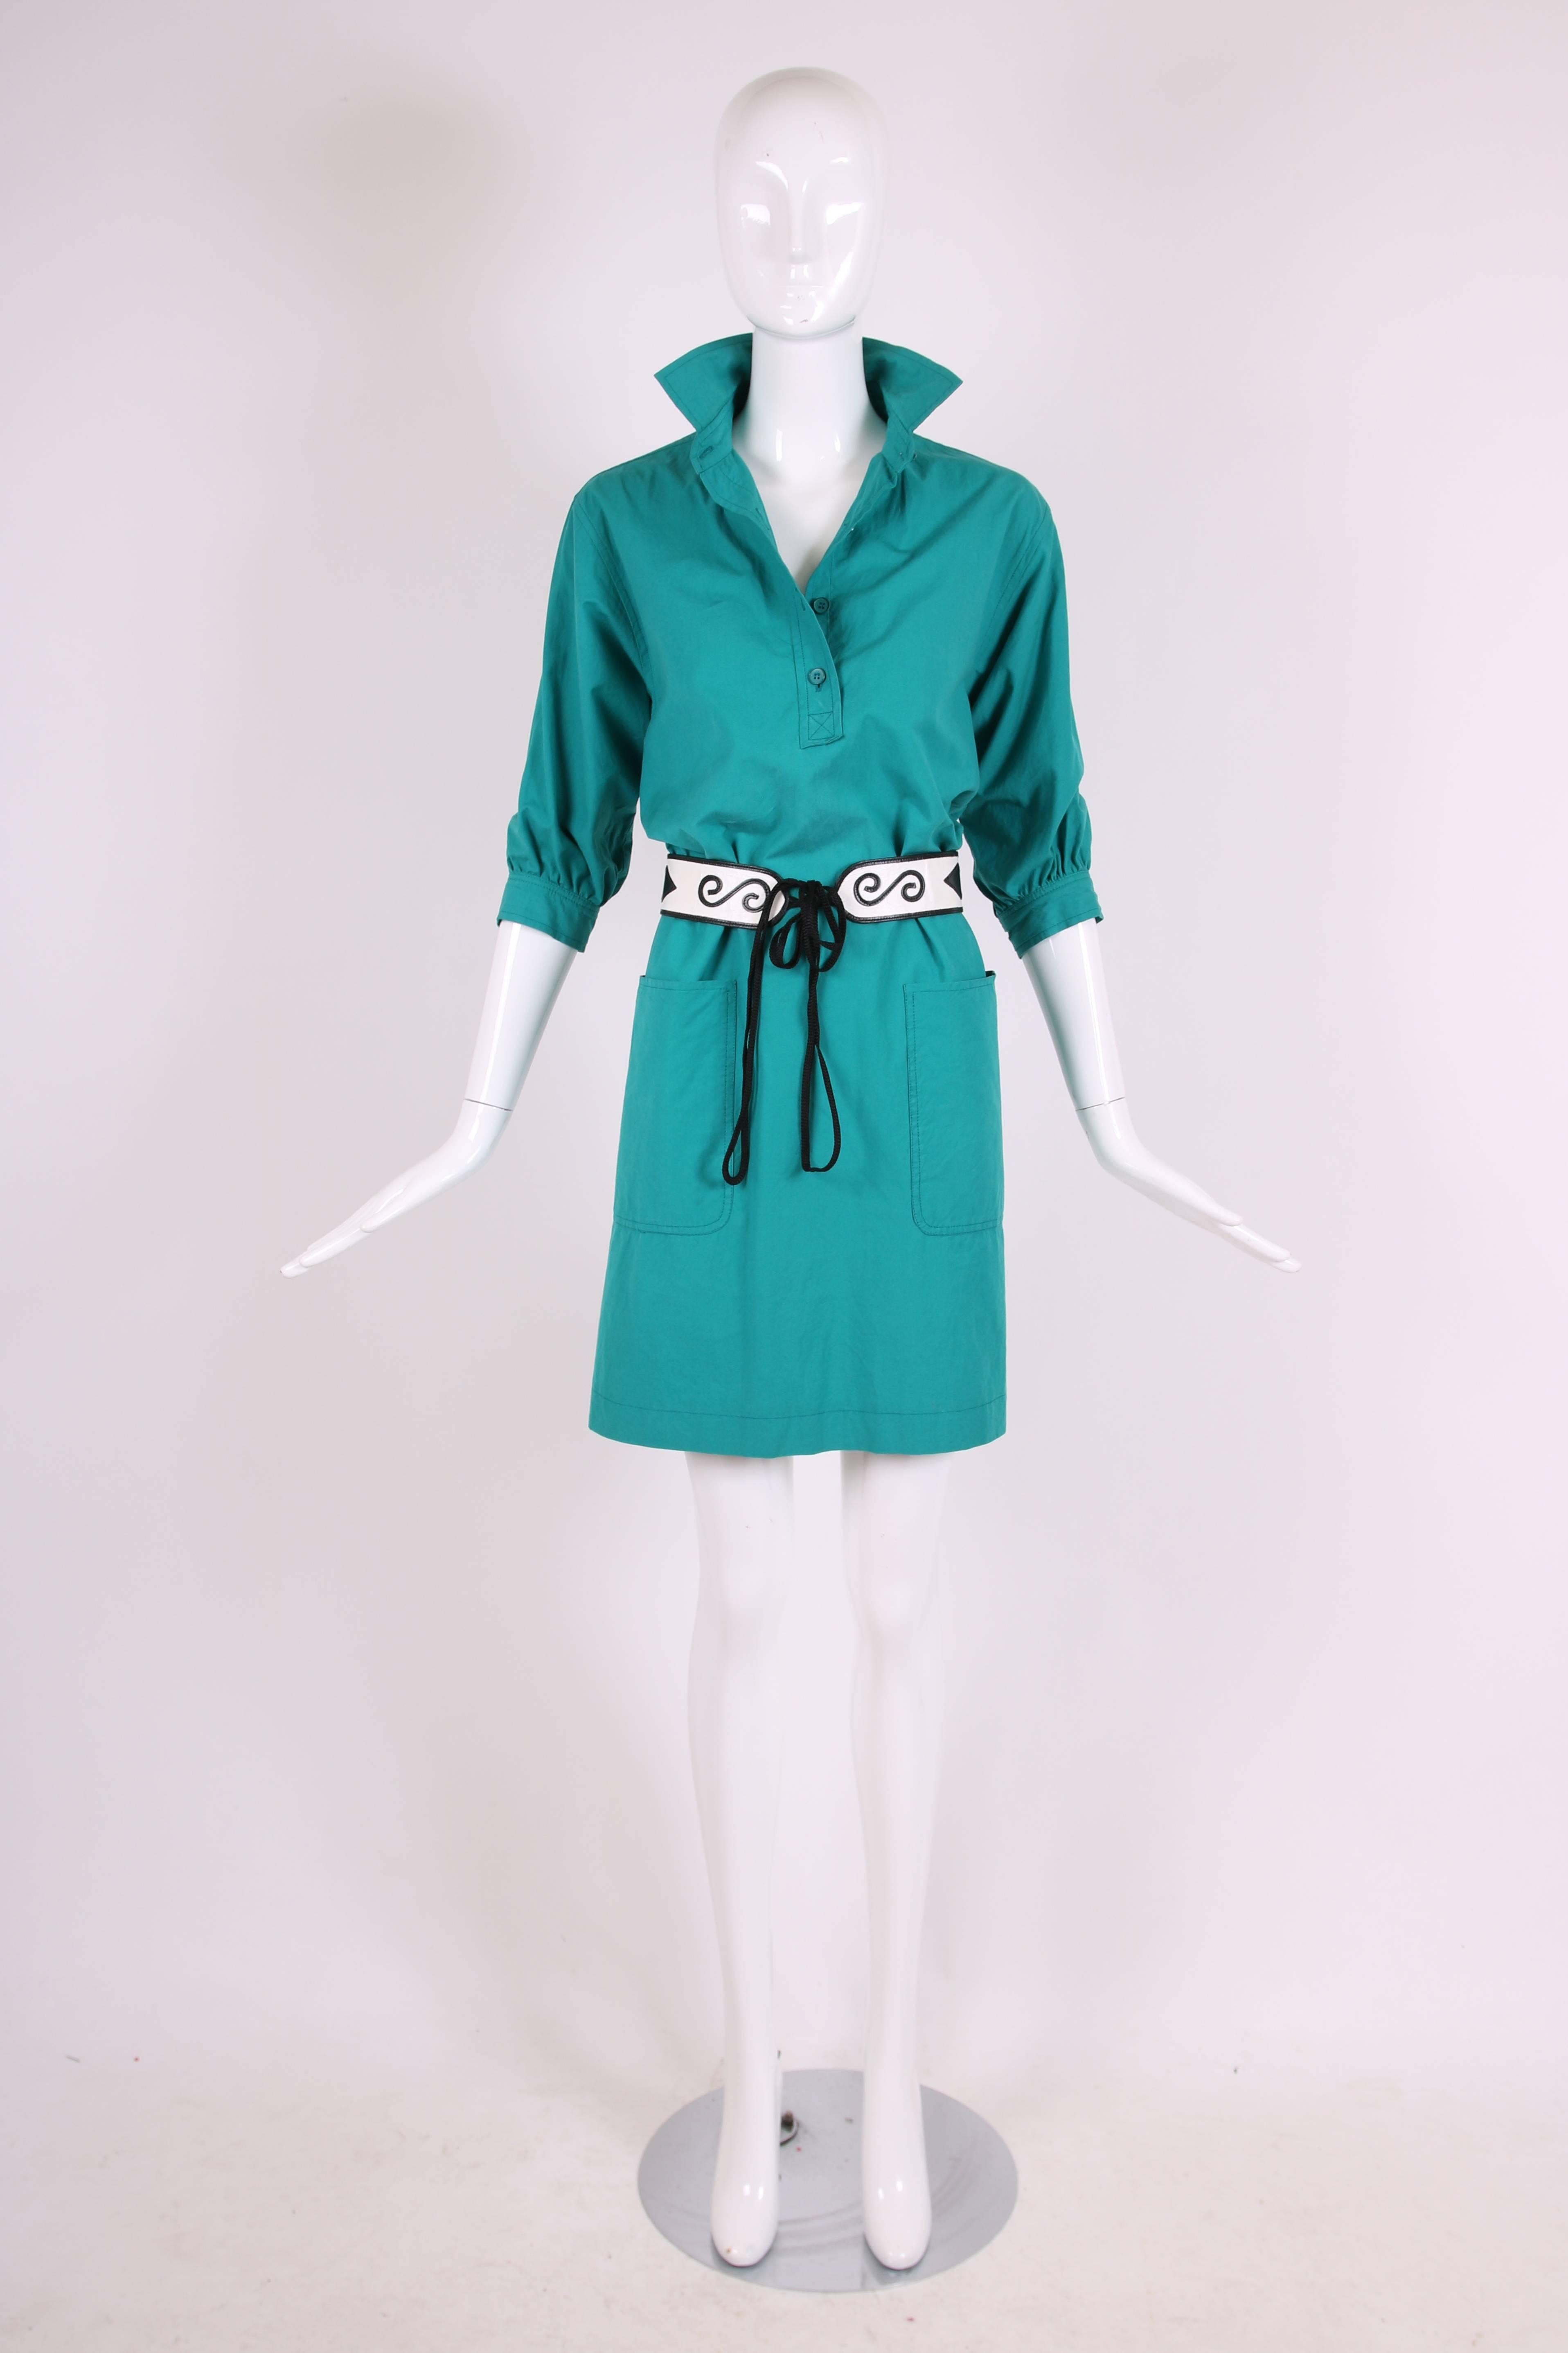 1970's Yves Saint Laurent YSL Teal Green Smock Dress In Excellent Condition For Sale In Studio City, CA